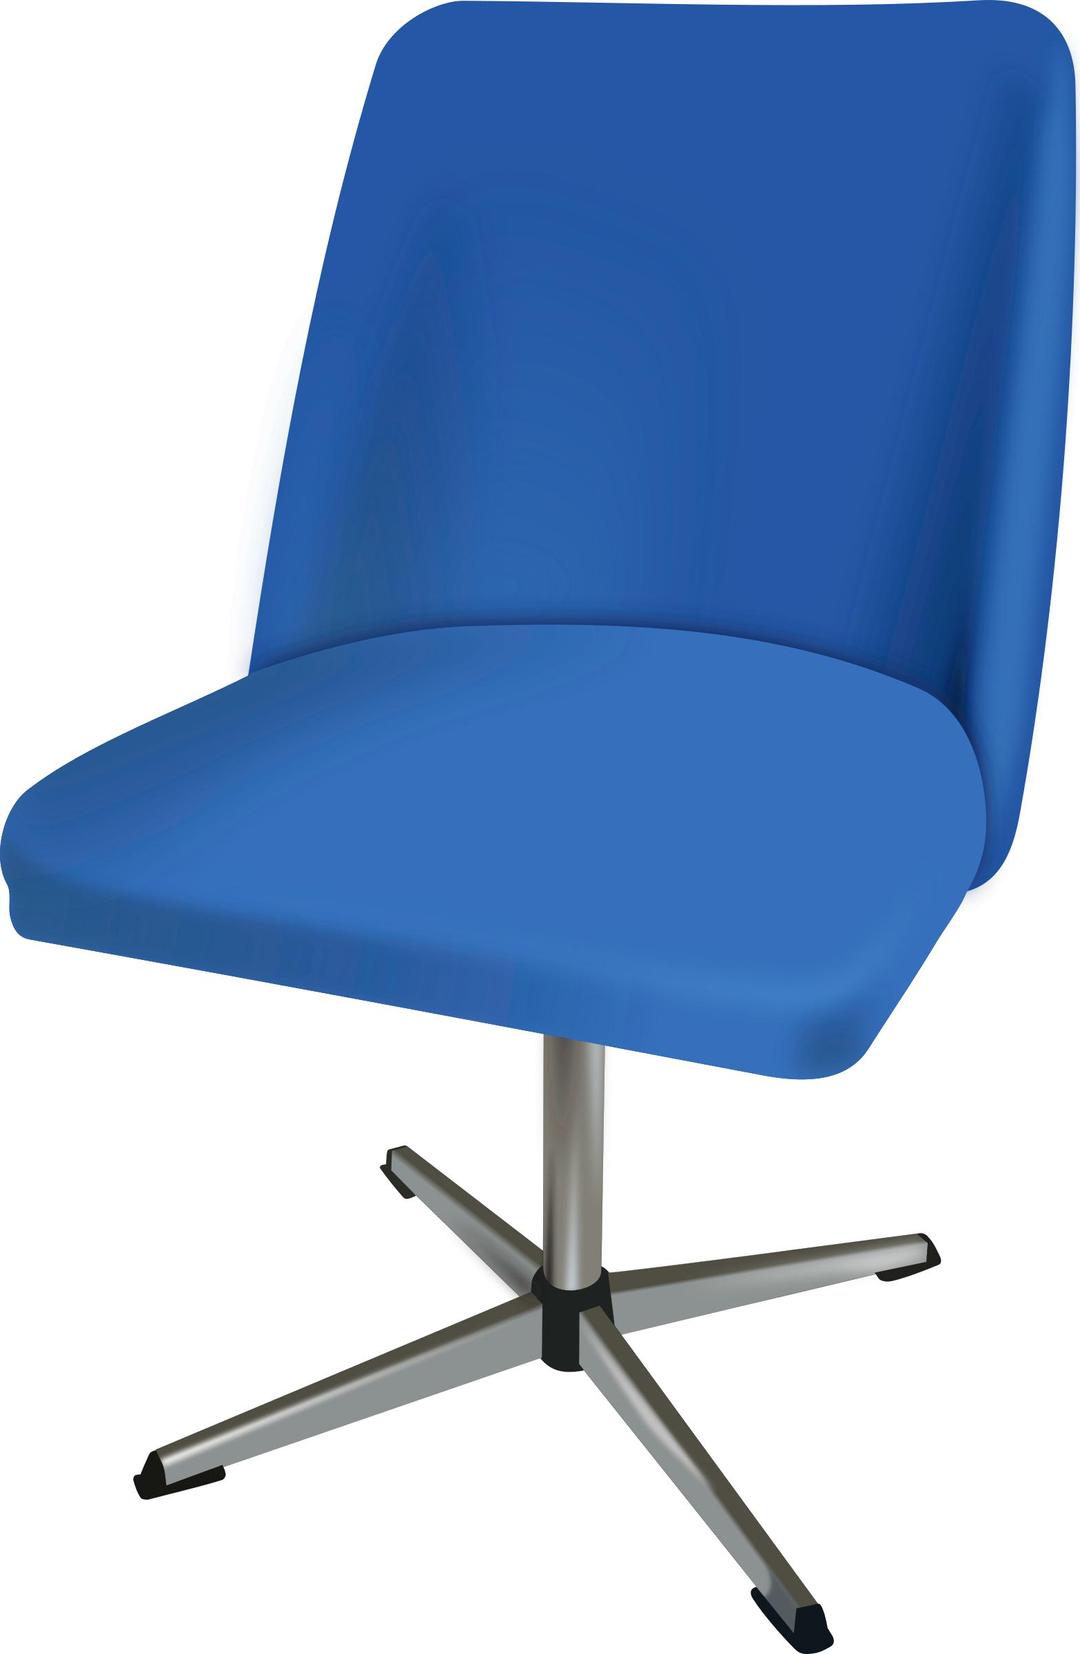 70s chair png transparent